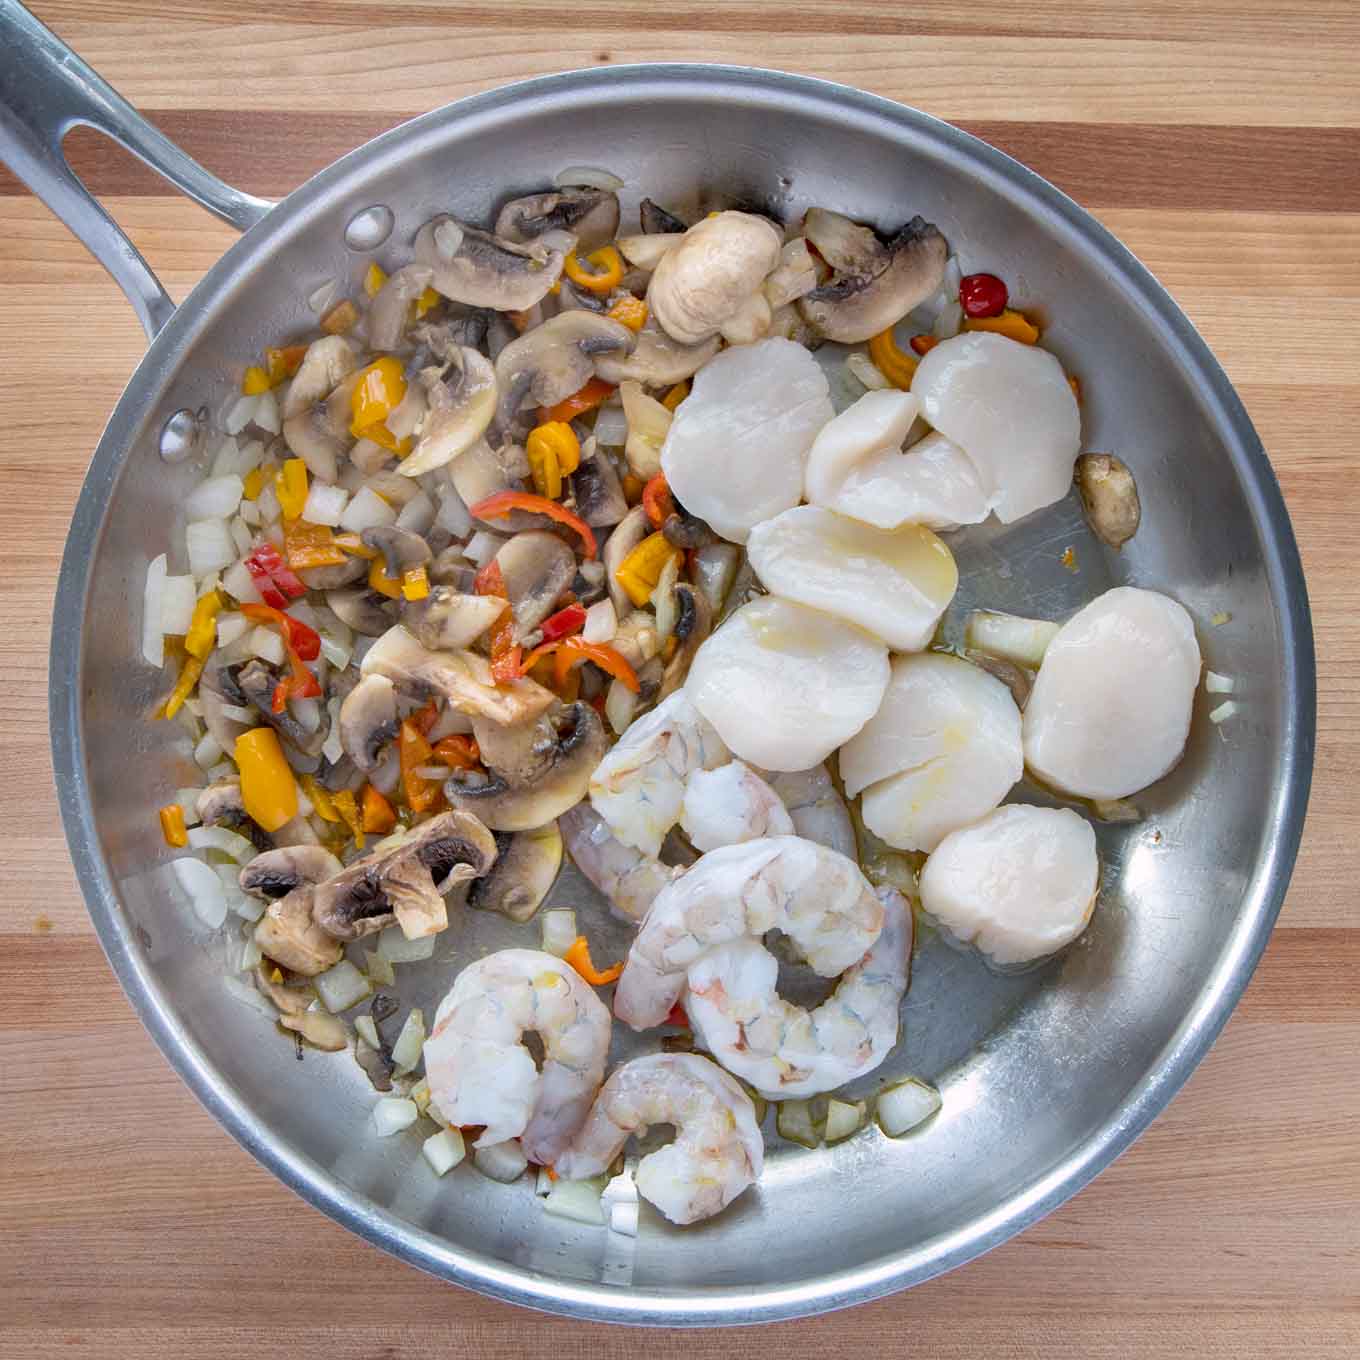 peppers, onions, mushroom, shrimp and scallops in a frying pan